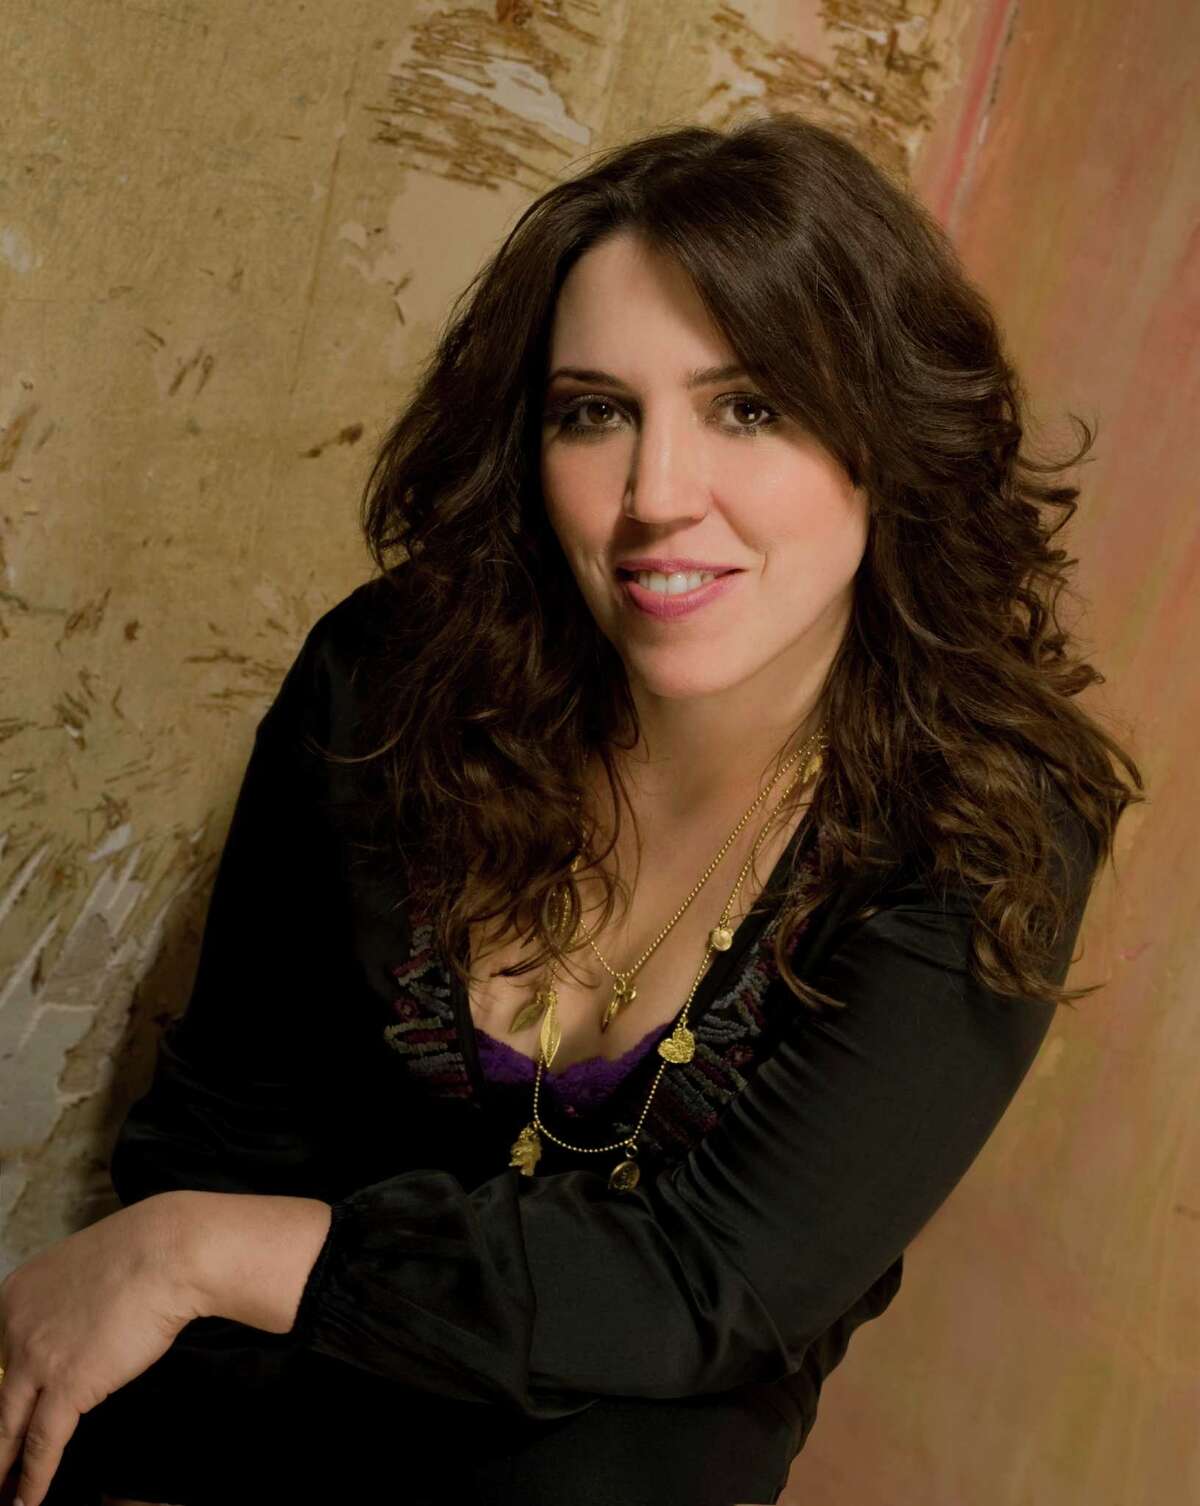 Pianist Gabriela Montero will perform George Gershwin's "Rhapsody in Blue" with the Houston Symphony.